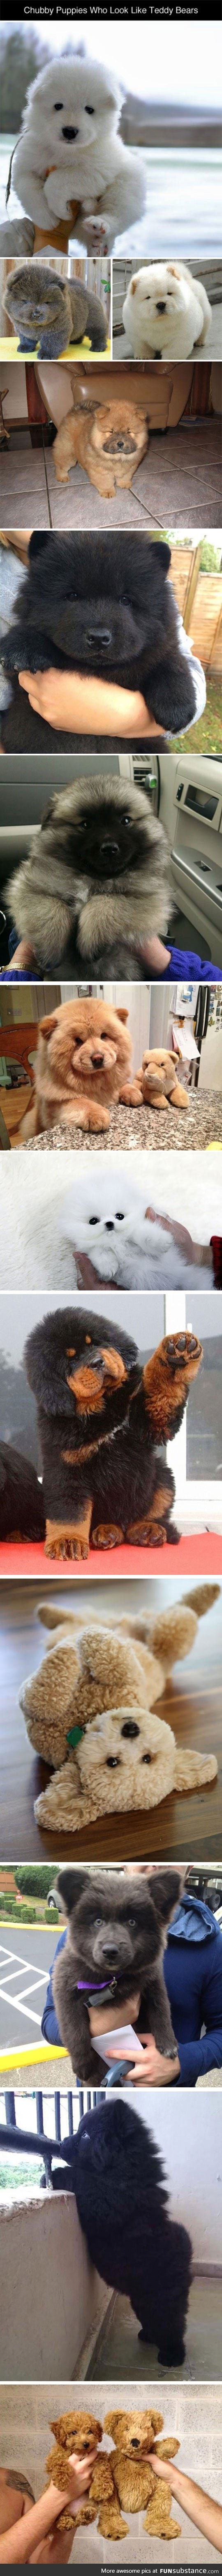 Puppies who are so chubby they look like teddy bears